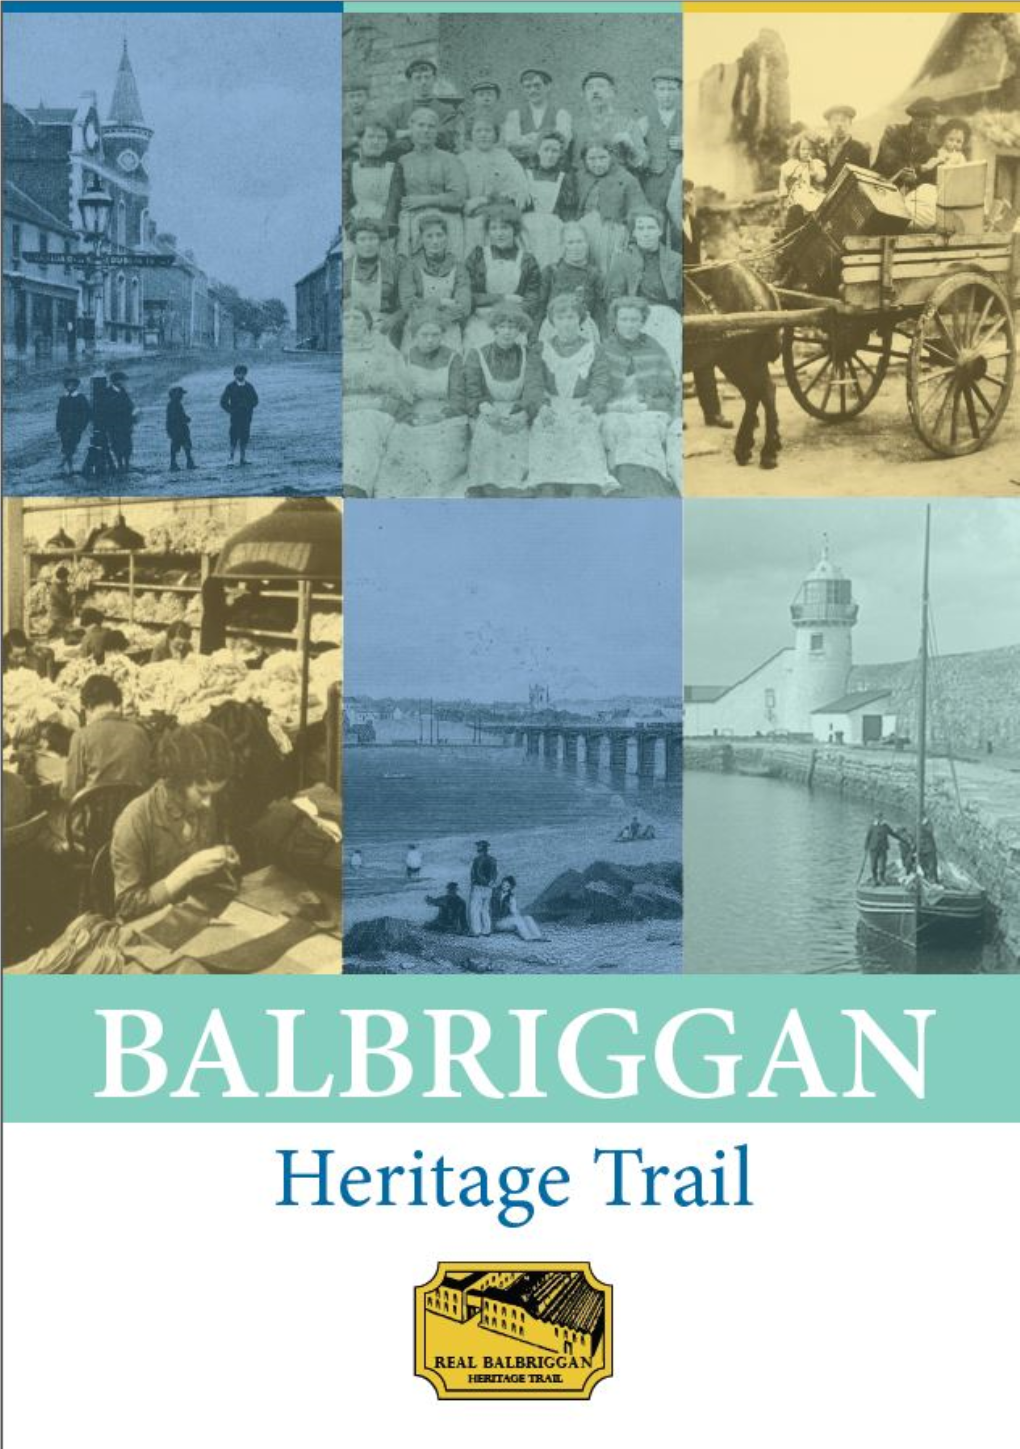 Herefore Much of the Evolution of Balbriggan, from a Small Hamlet to Larger Village and Later a Thriving Town, Can Be Attributed to the Hamilton Family